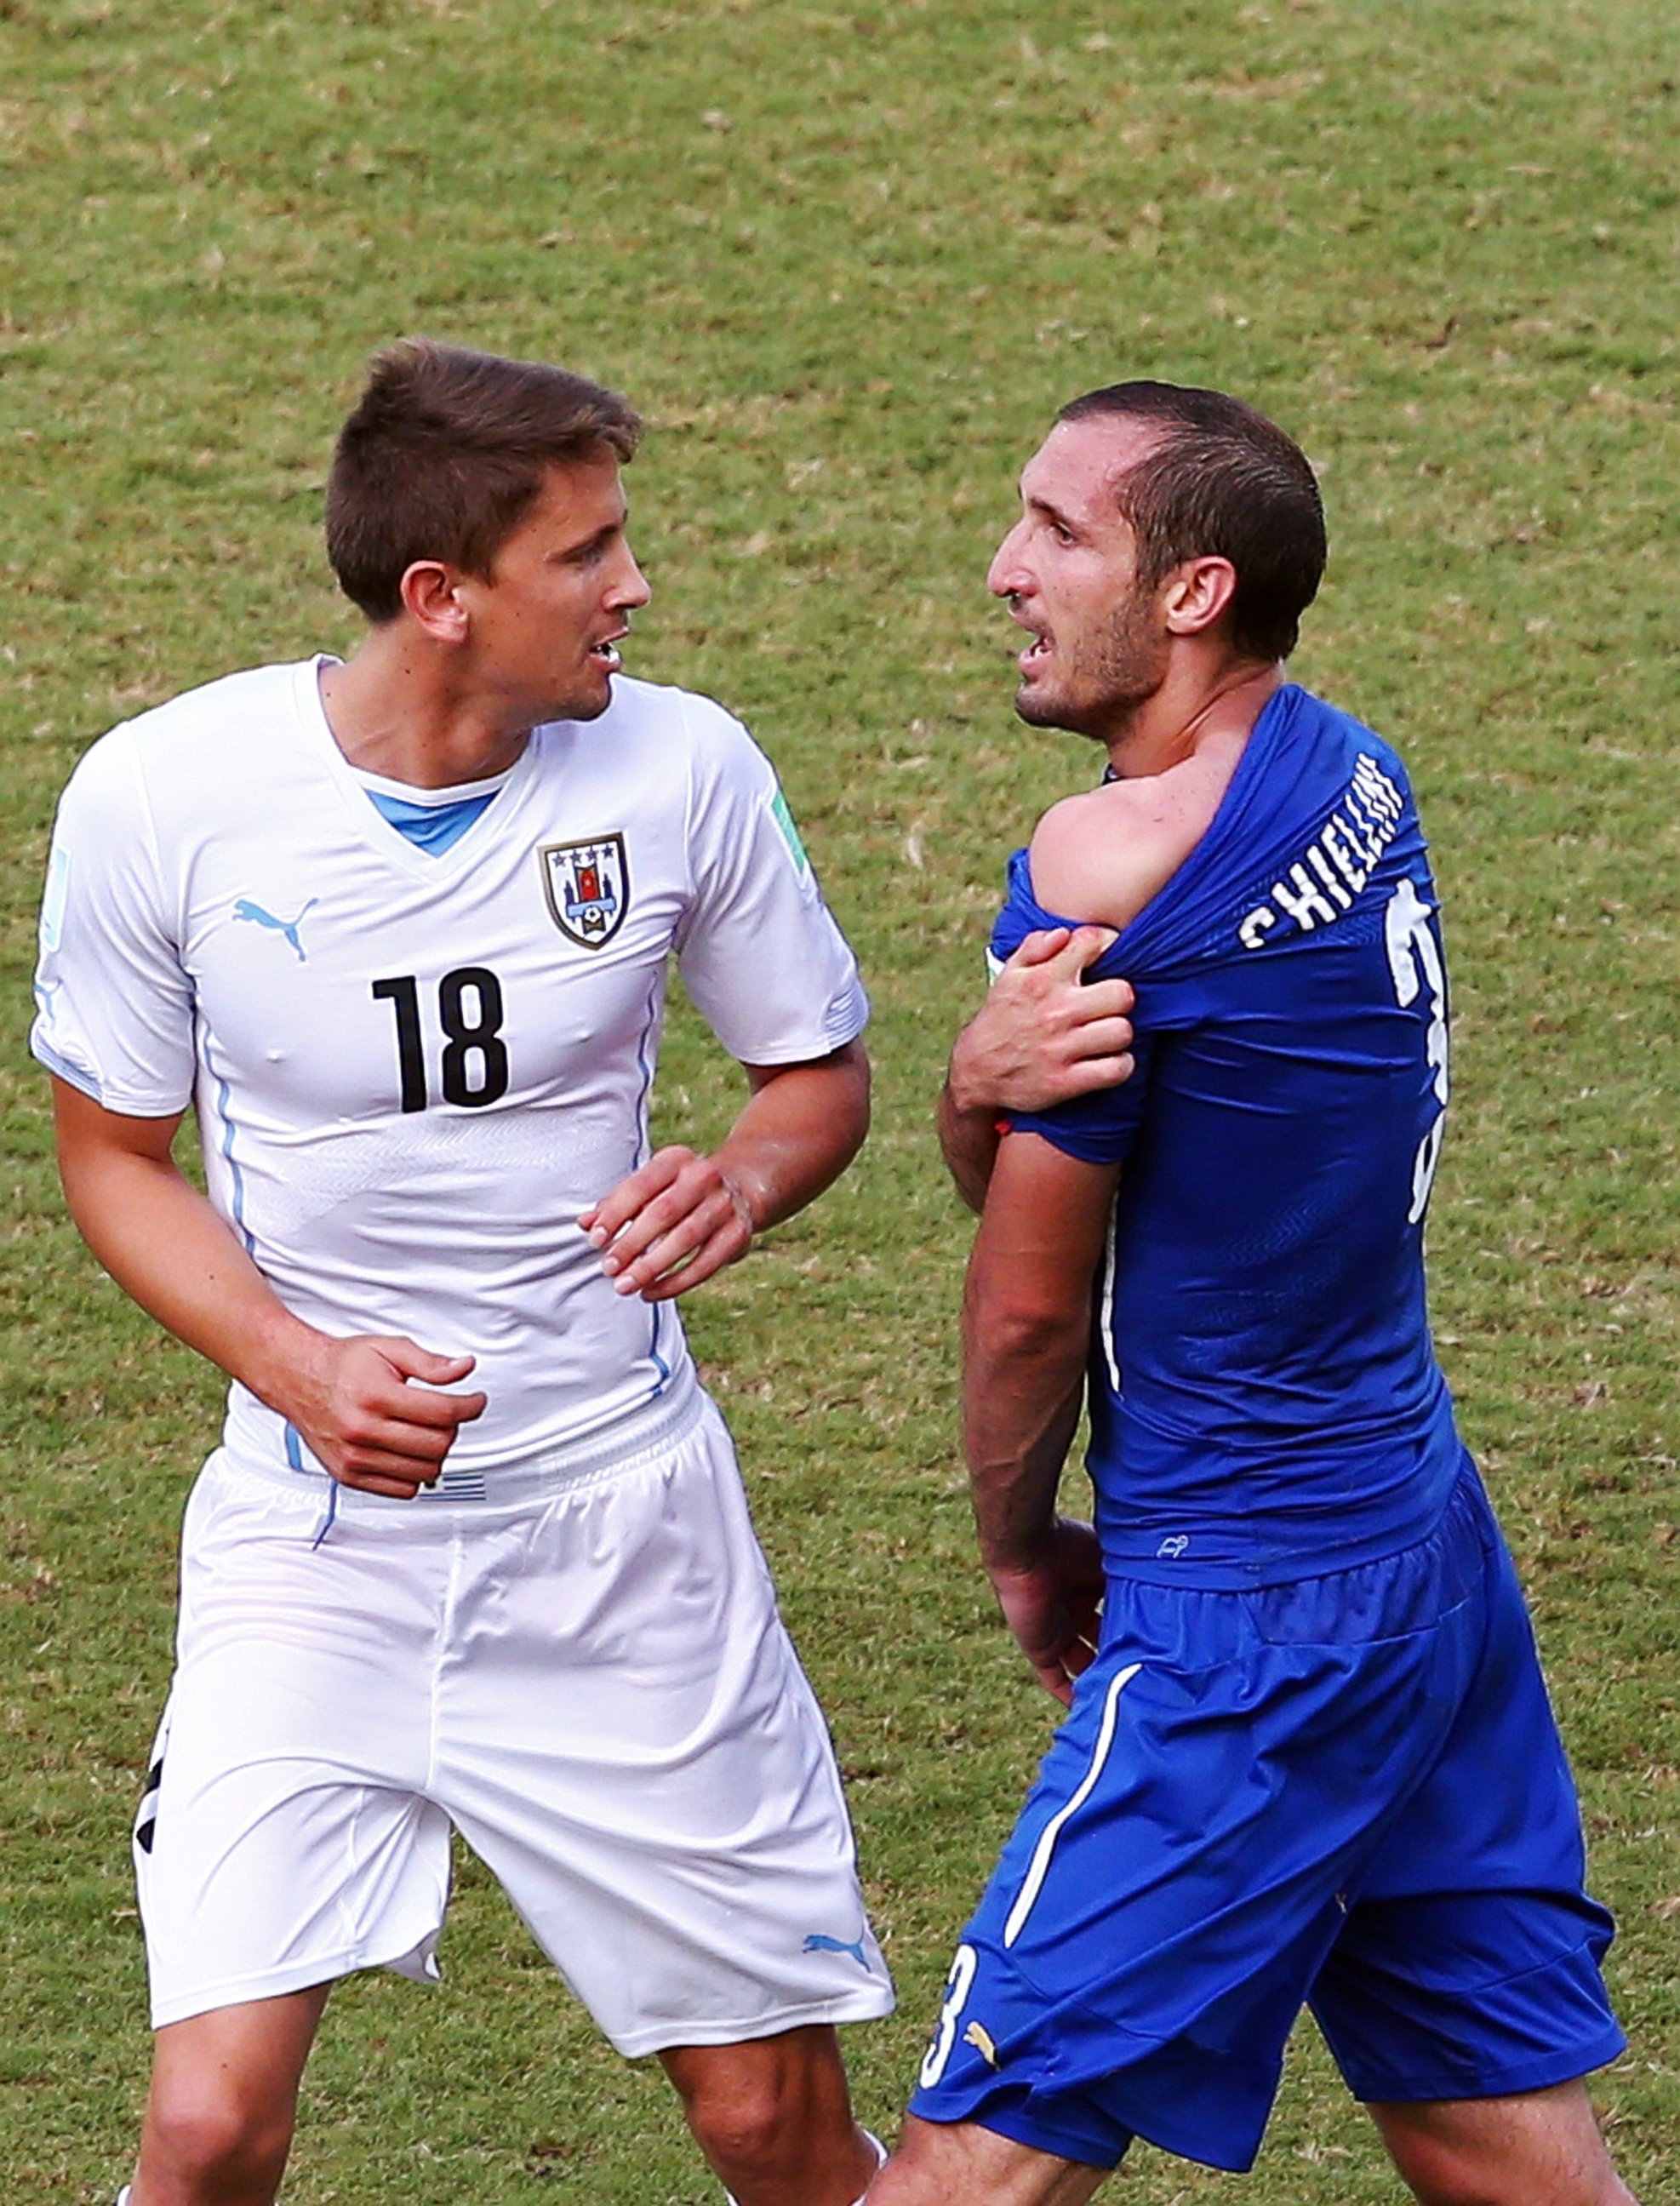 PHOTO: Giorgio Chiellini of Italy pulls down his shirt after a clash with Luis Suarez of Uruguay (not pictured) as Gaston Ramirez of Uruguay looks on during the match between Italy and Uruguay at Estadio das Dunas on June 24, 2014 in Natal, Brazil.  